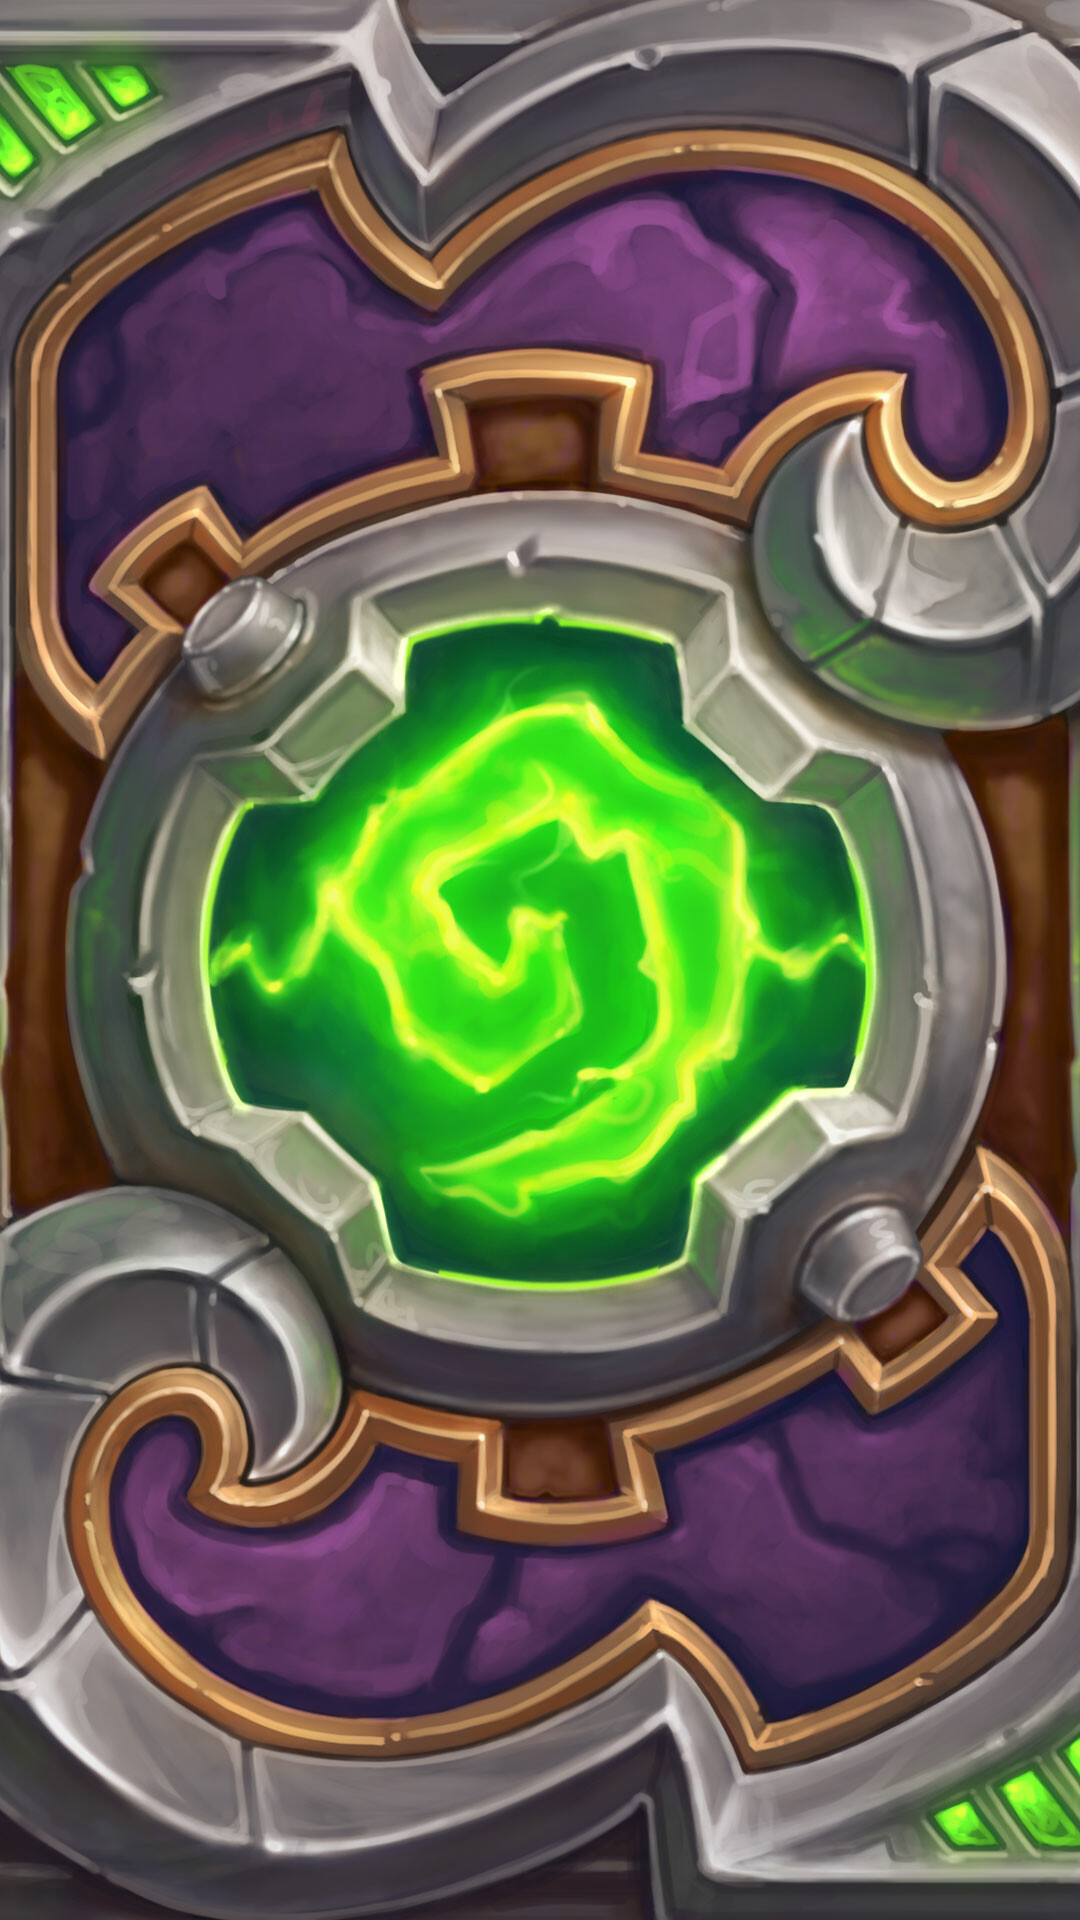 Hearthstone: Players start the game with a limited collection of basic cards but can gain rarer and more powerful cards through purchasing packs of cards or as rewards from specific game modes. 1080x1920 Full HD Background.